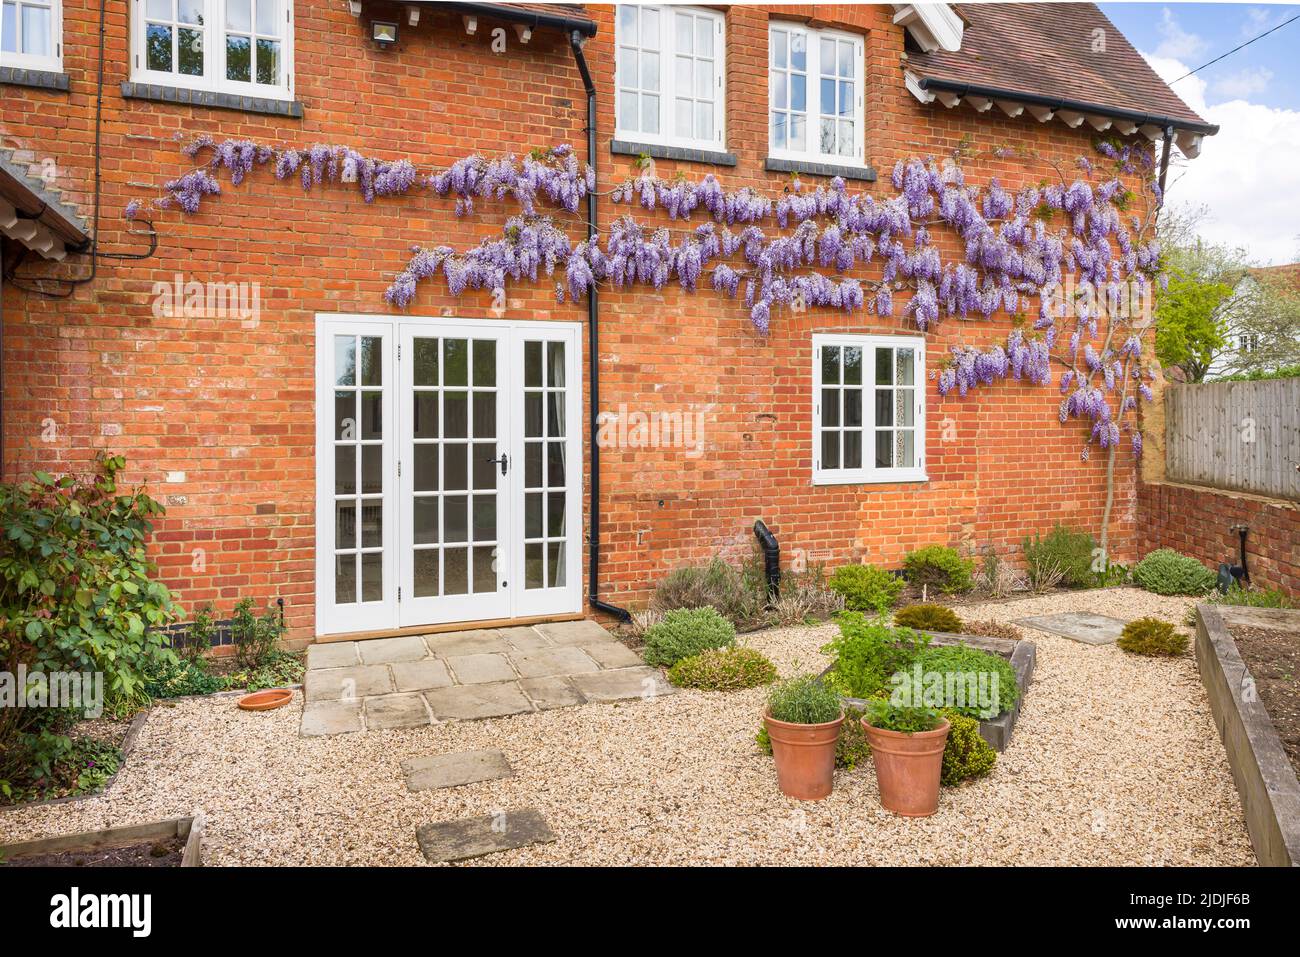 Victorian house with wooden windows, French doors and wisteria. Hard landscaped garden with York stone patio and gravel. England, UK Stock Photo